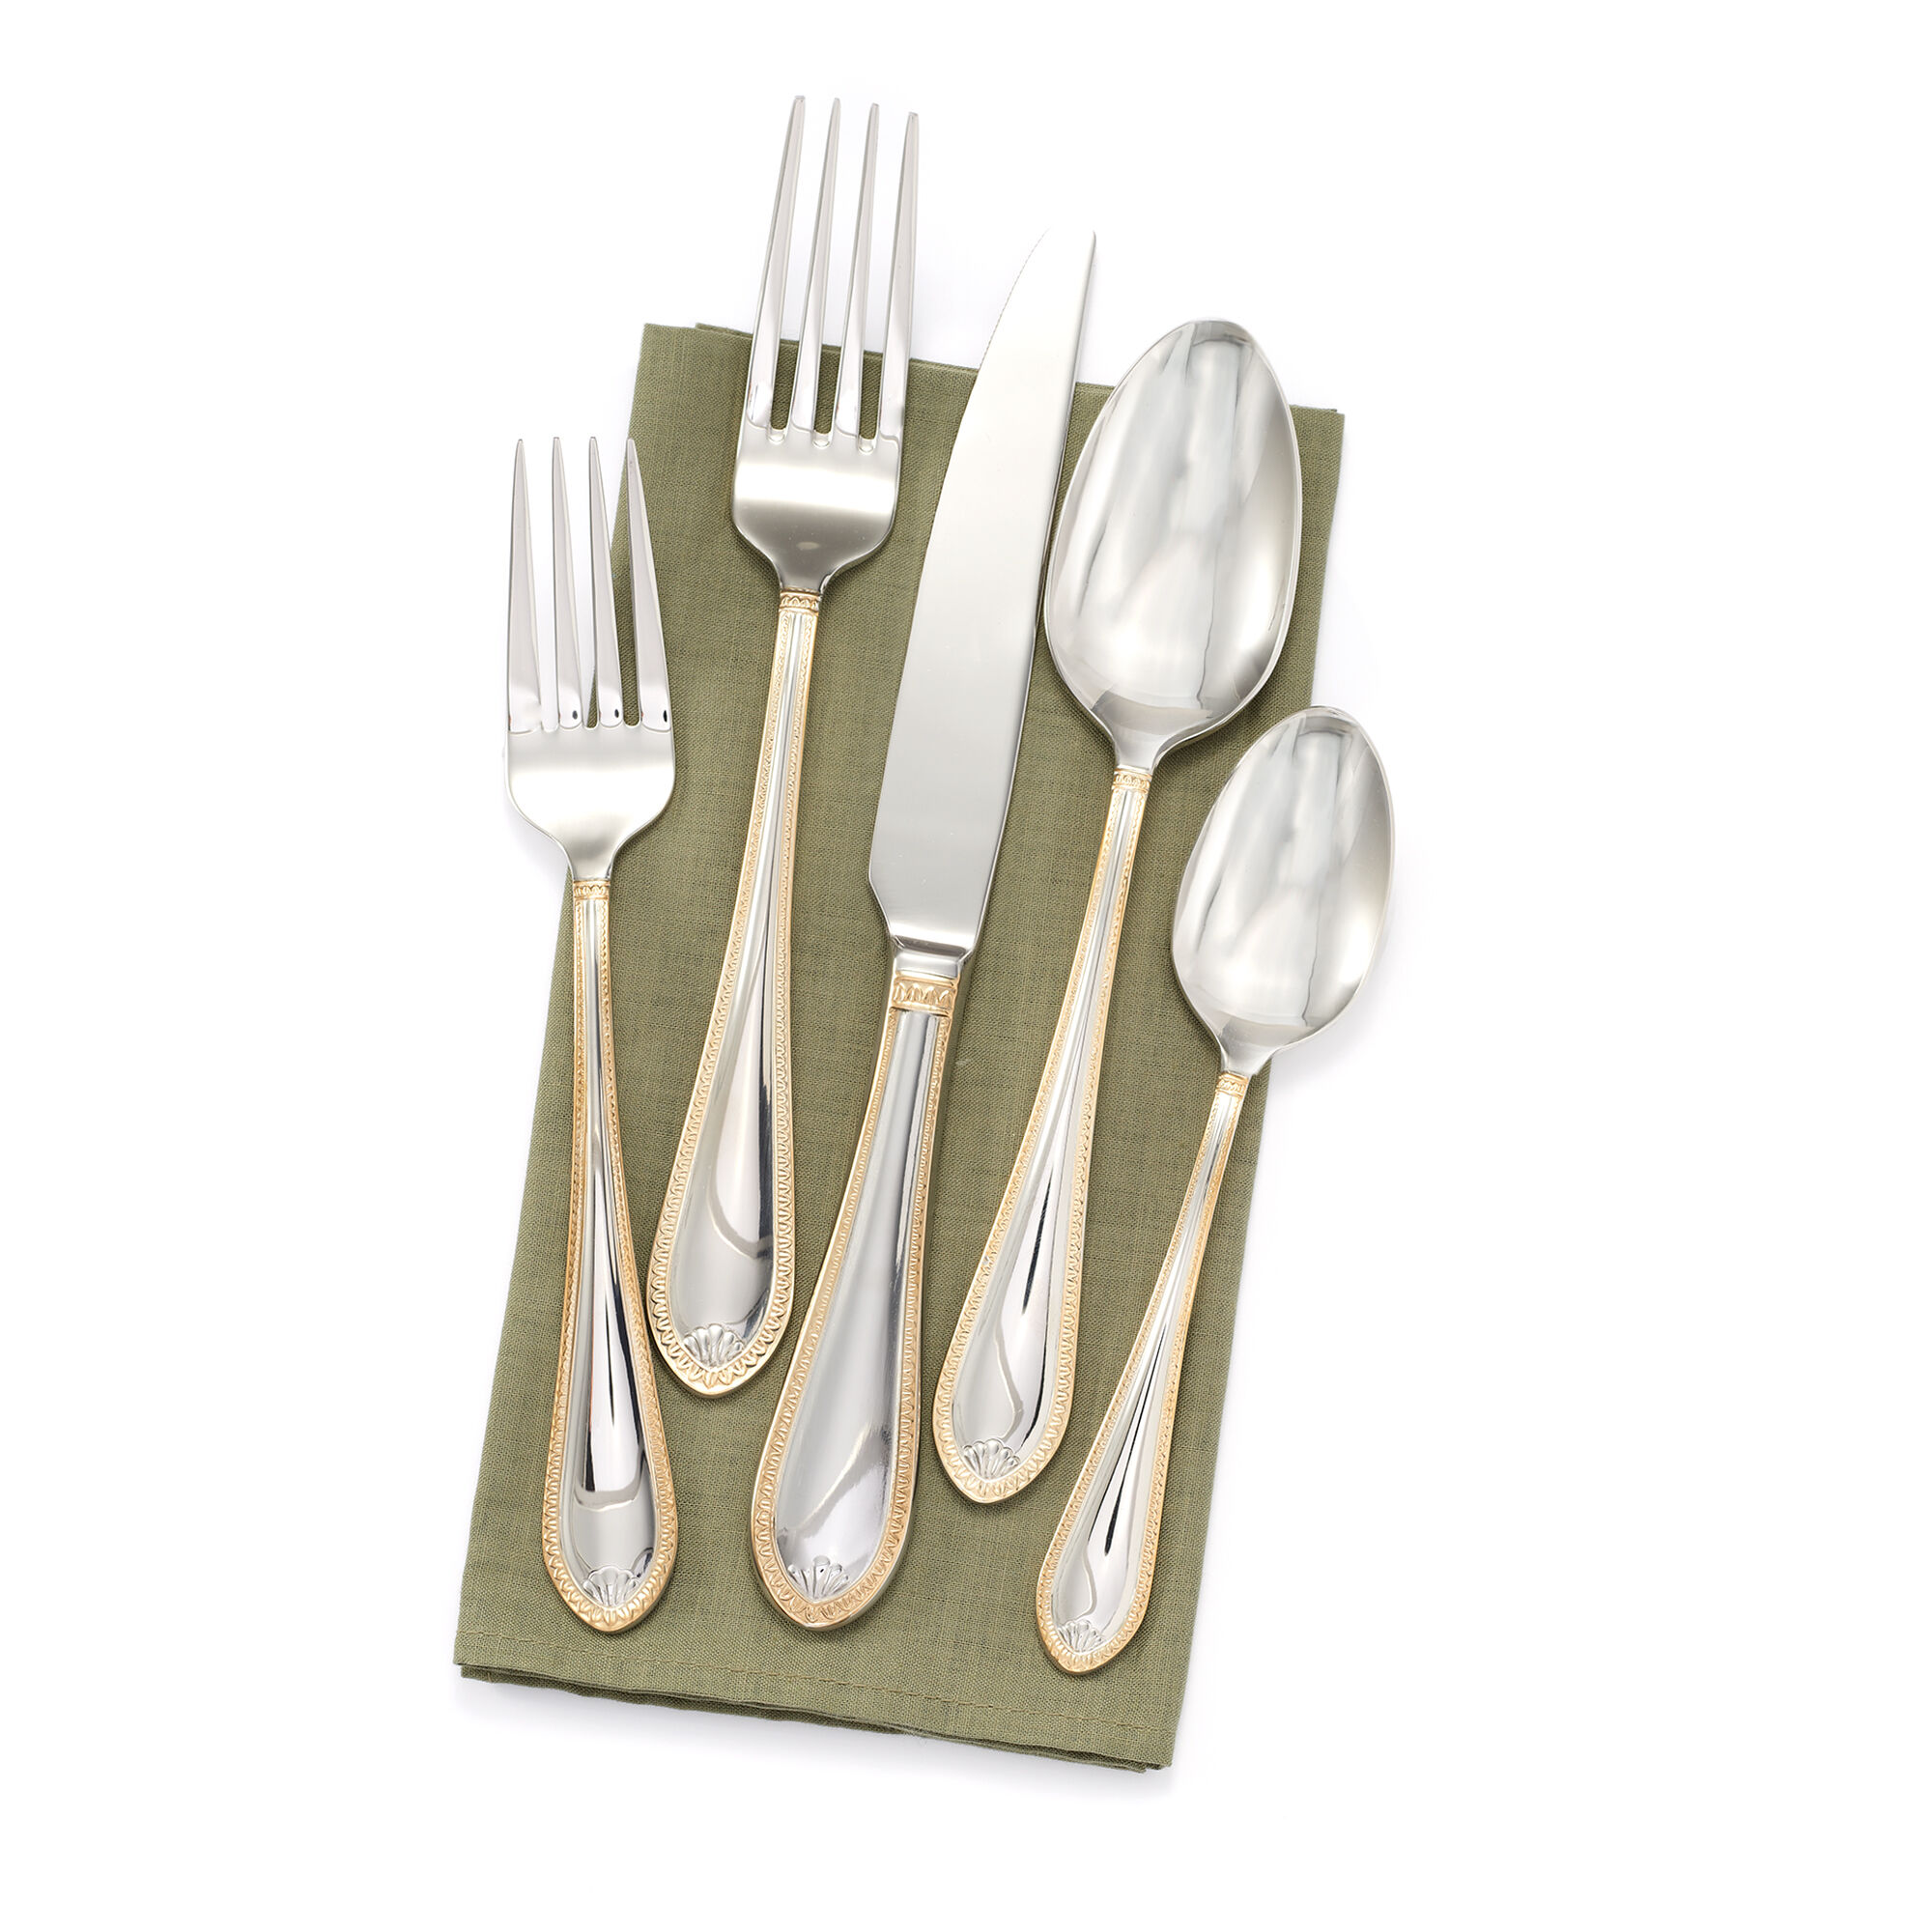 18 10 stainless steel flatware reviews